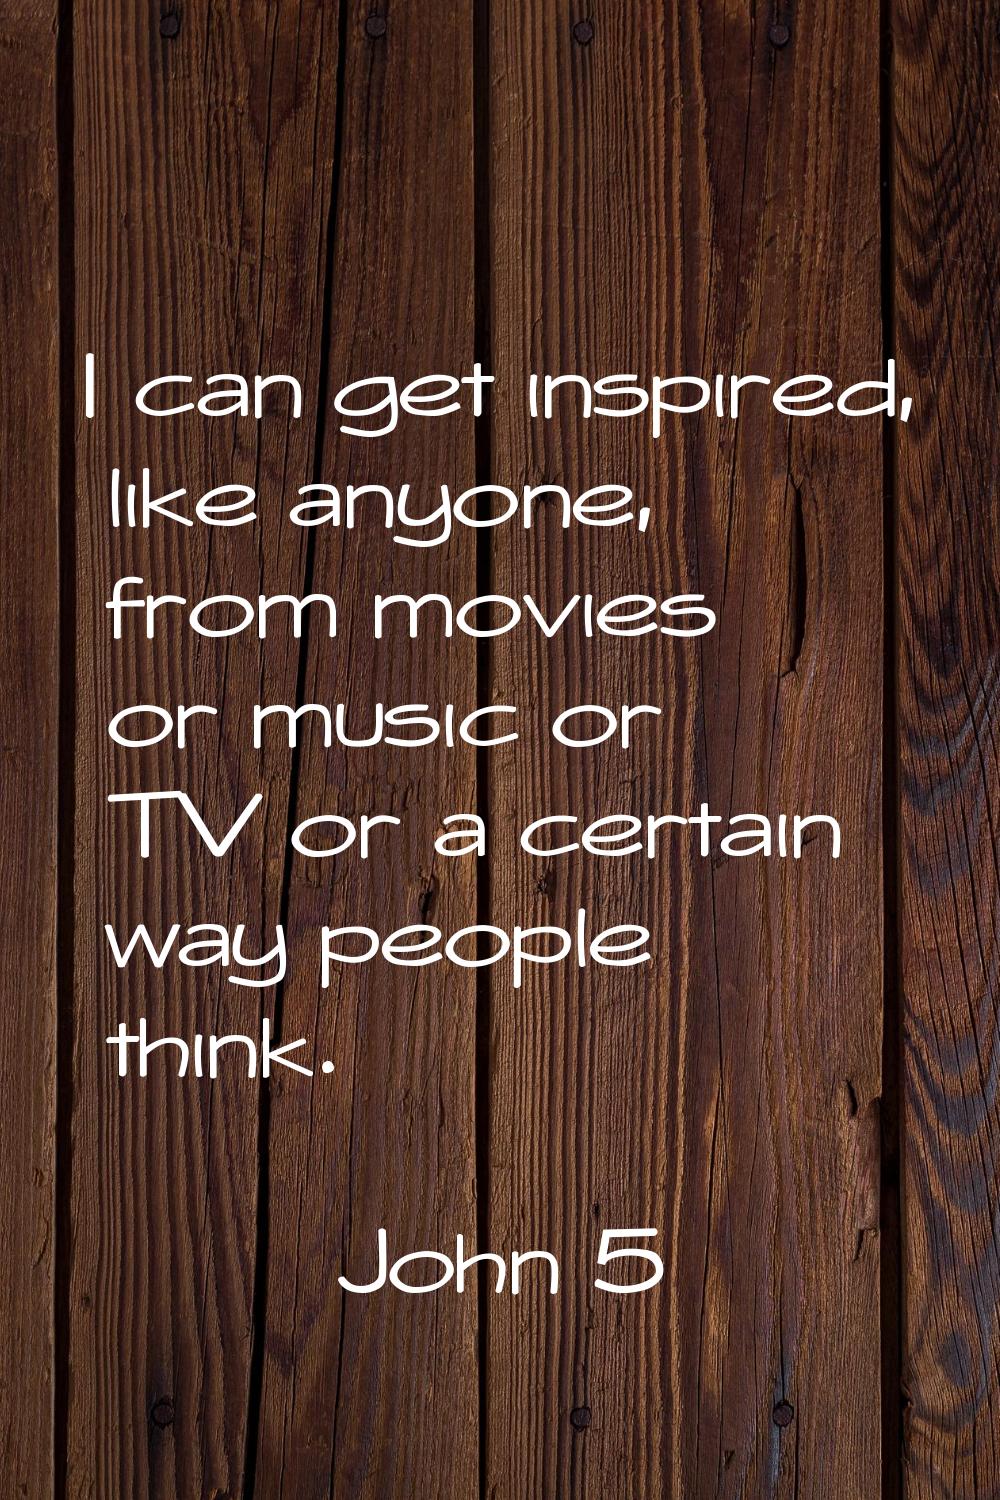 I can get inspired, like anyone, from movies or music or TV or a certain way people think.